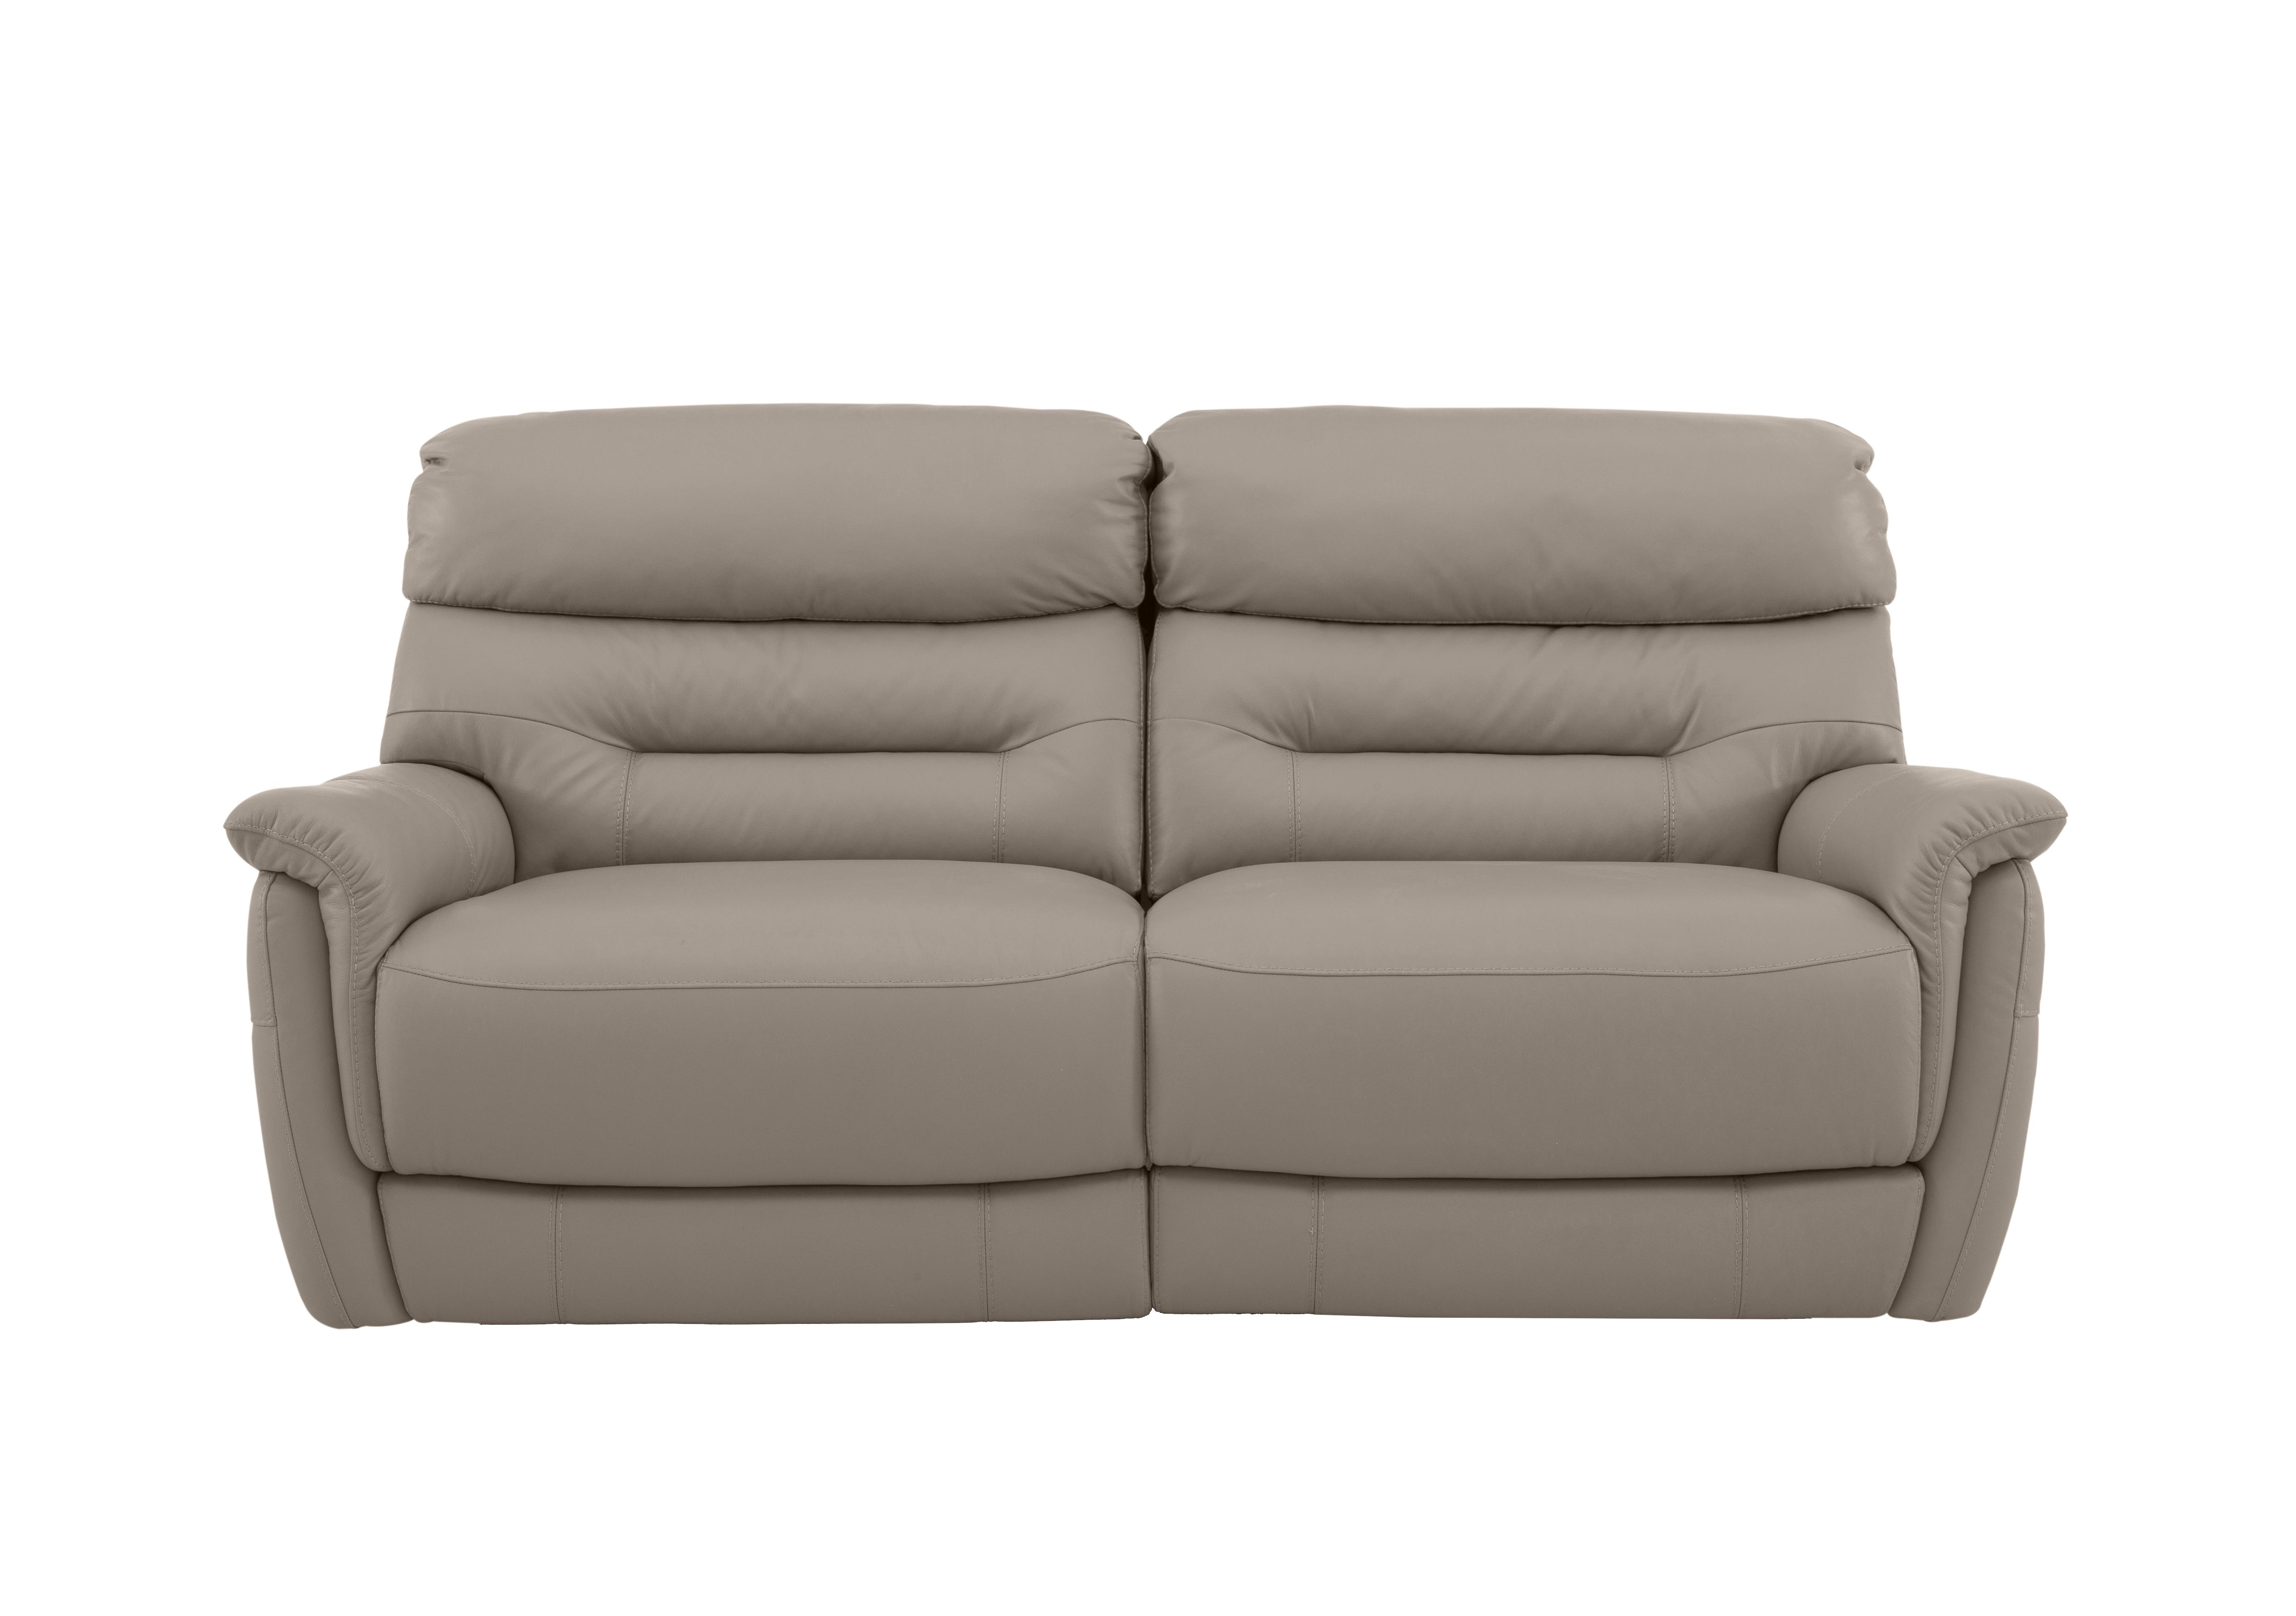 Chicago 3 Seater Leather Sofa in An-946b Silver Grey on Furniture Village